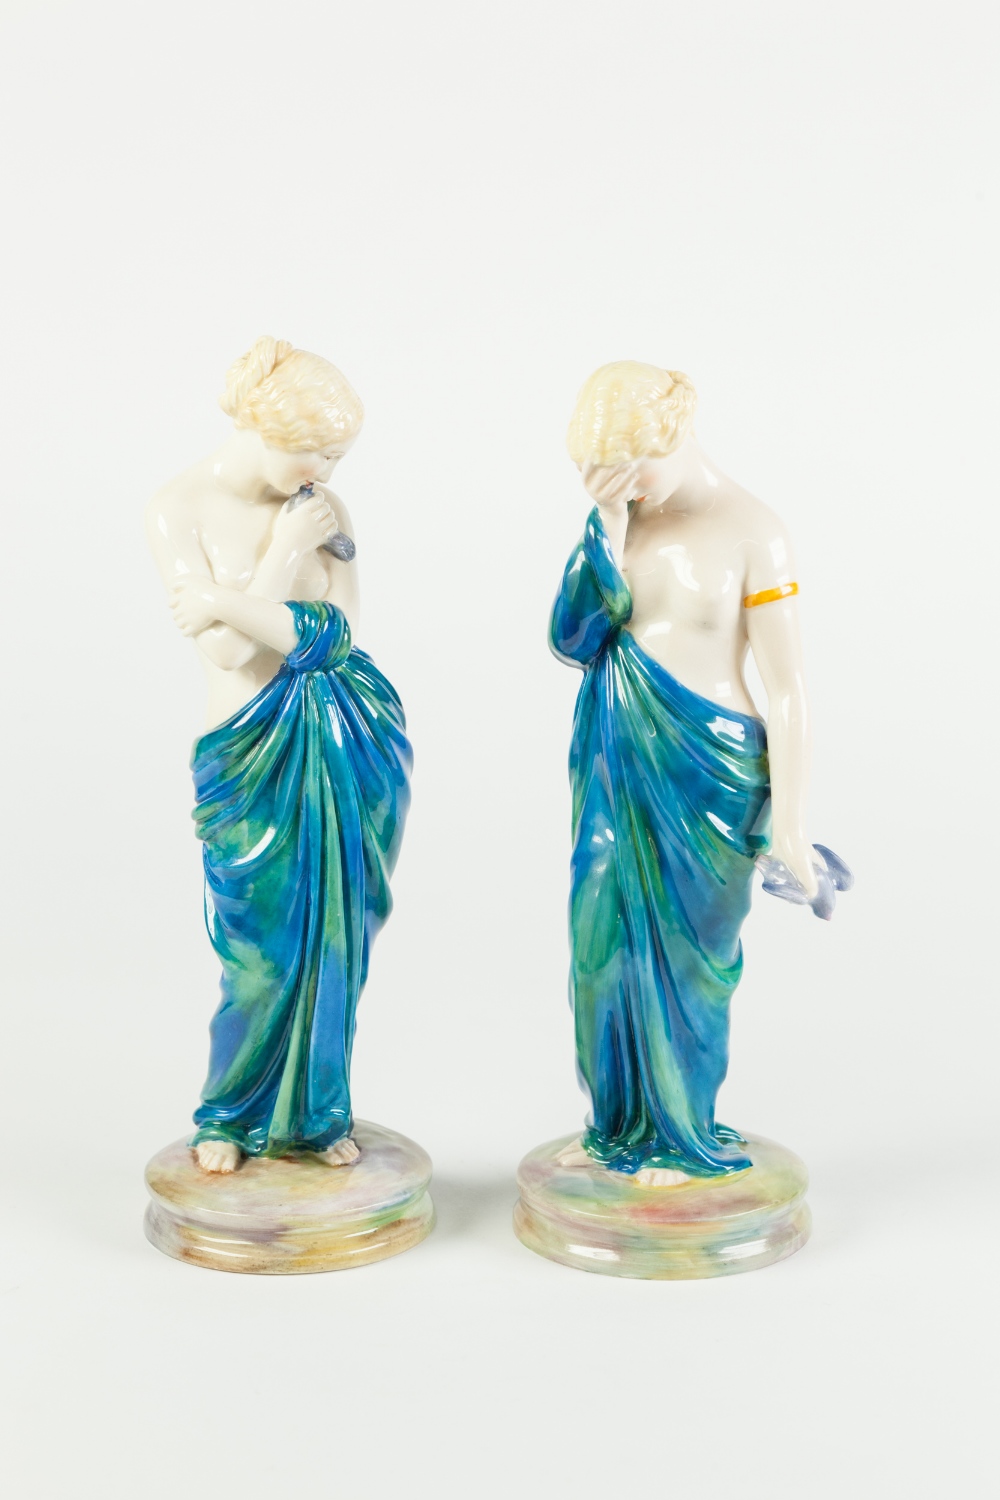 PAIR OF ROYAL WORCESTER CHINA FIGURES MODELLED BY JAMES HADLEY, 'JOY' and 'SORROW', each modelled as - Image 2 of 2